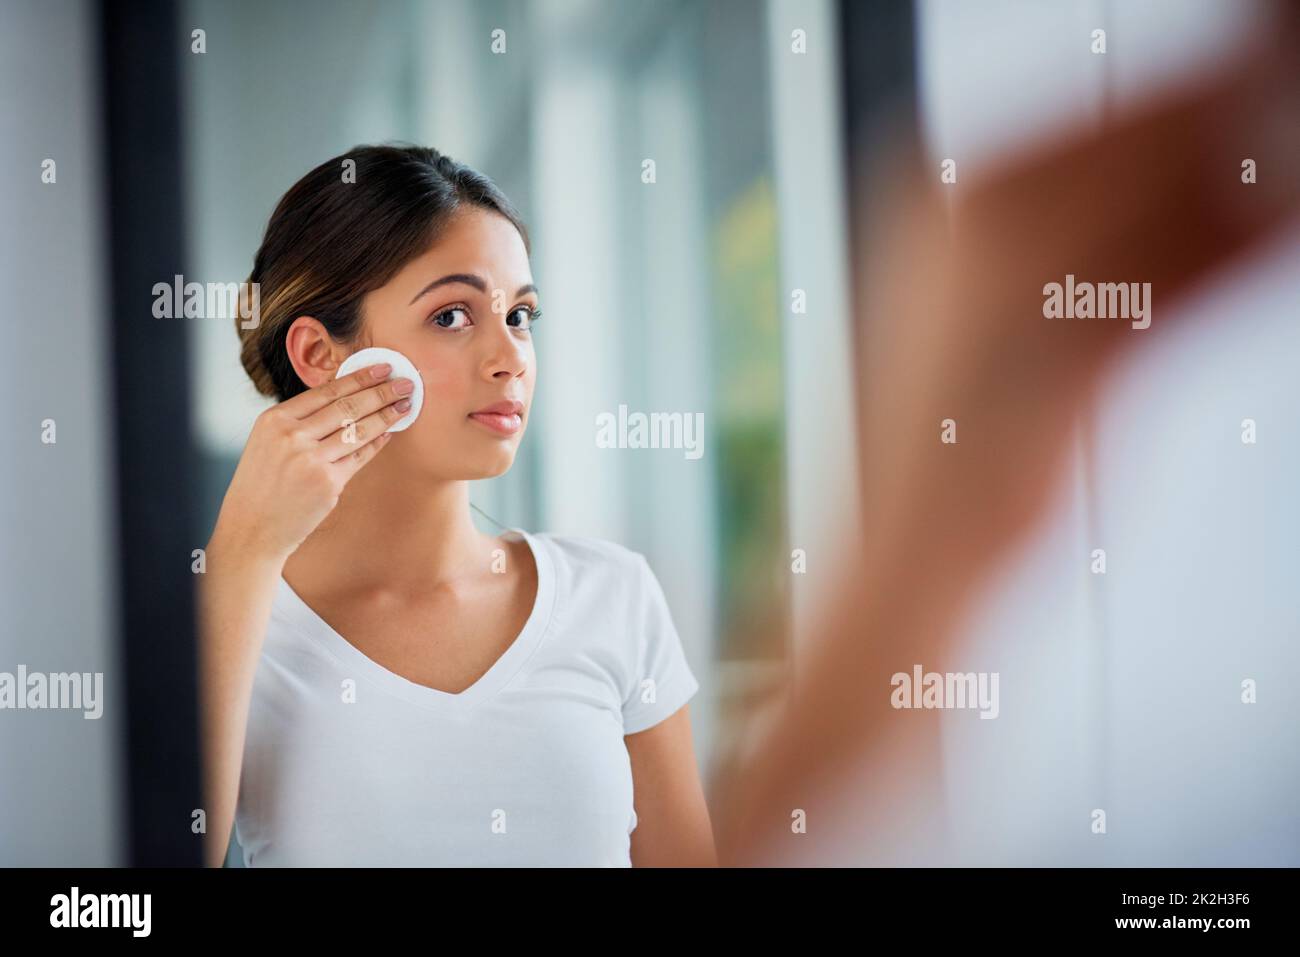 Caring for her vibrantly soft skin. Shot of an attractive young woman cleaning her face with cotton wool in the bathroom. Stock Photo